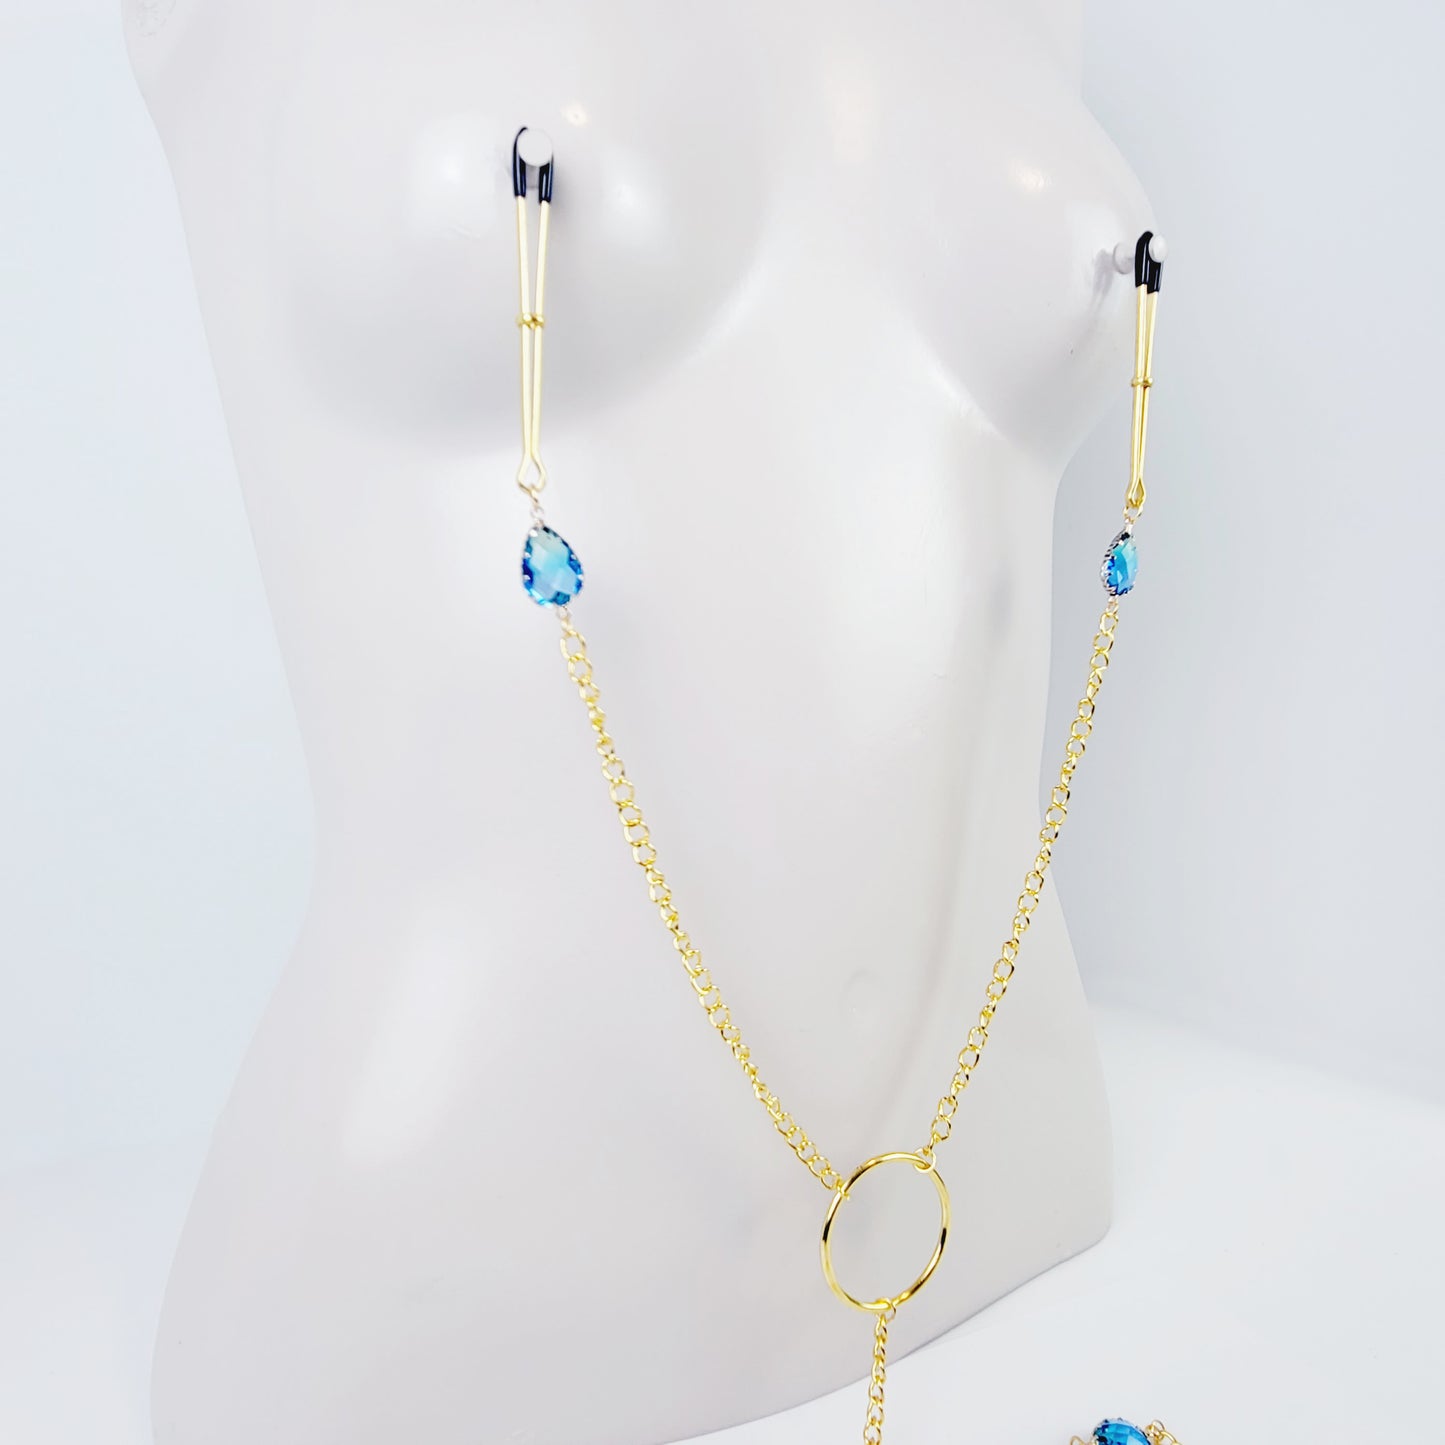 Nipple To Clit Clamps. Gold Tweezer Nipple Clamps, Chain Attached, with Tweezer Clitoral Clamp and Blue Gems. MATURE, BDSM